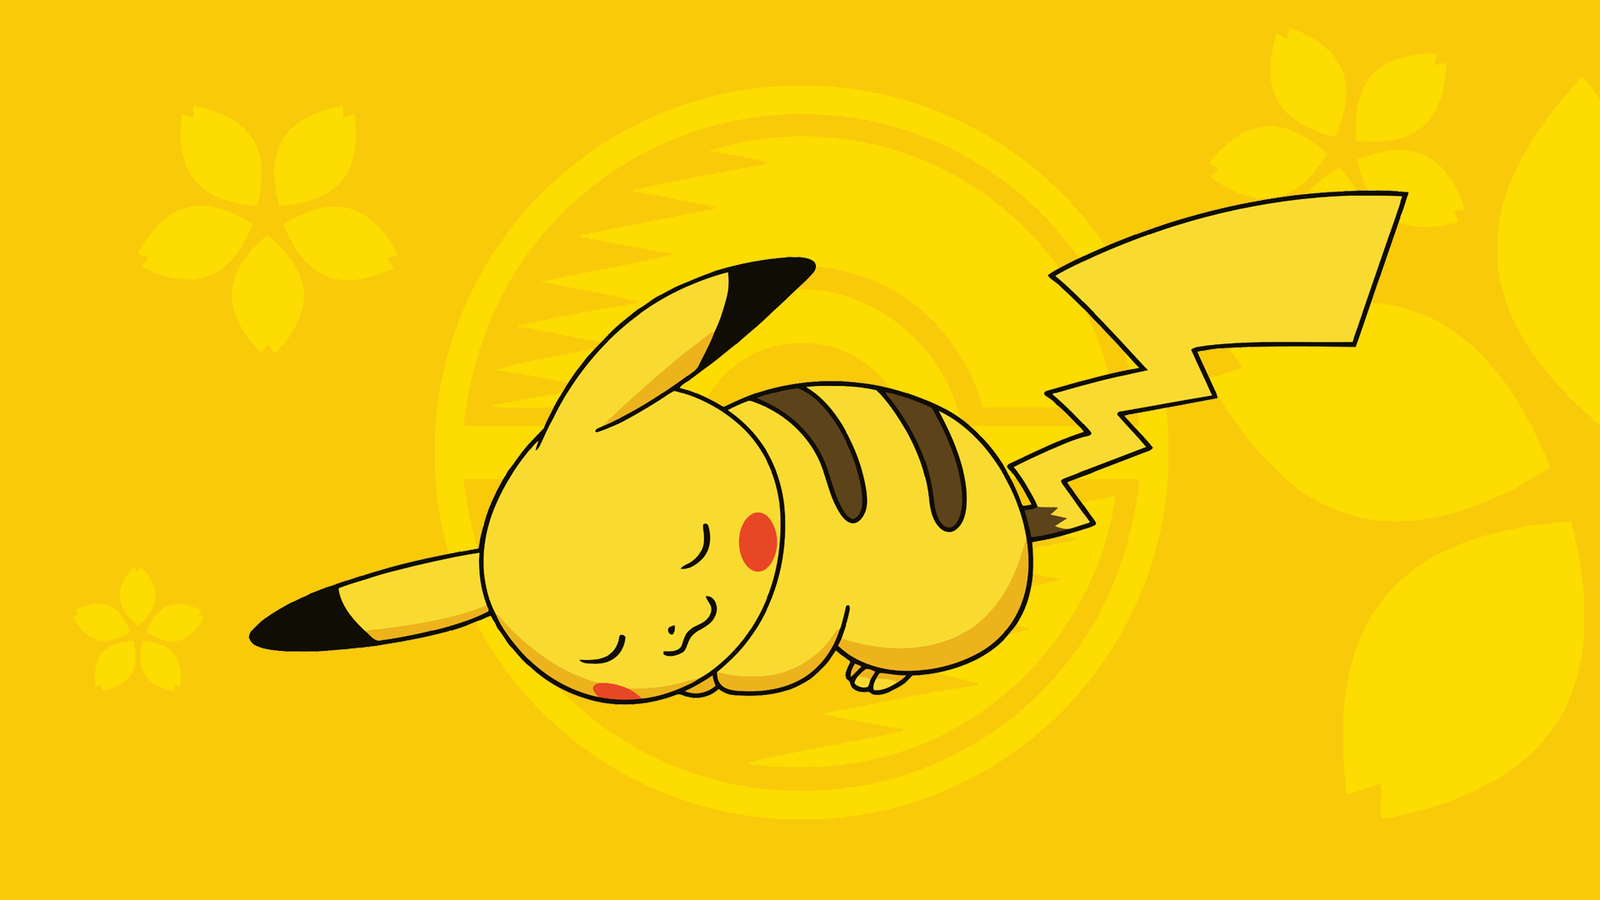 Pikachu 1080p Background Picture Image